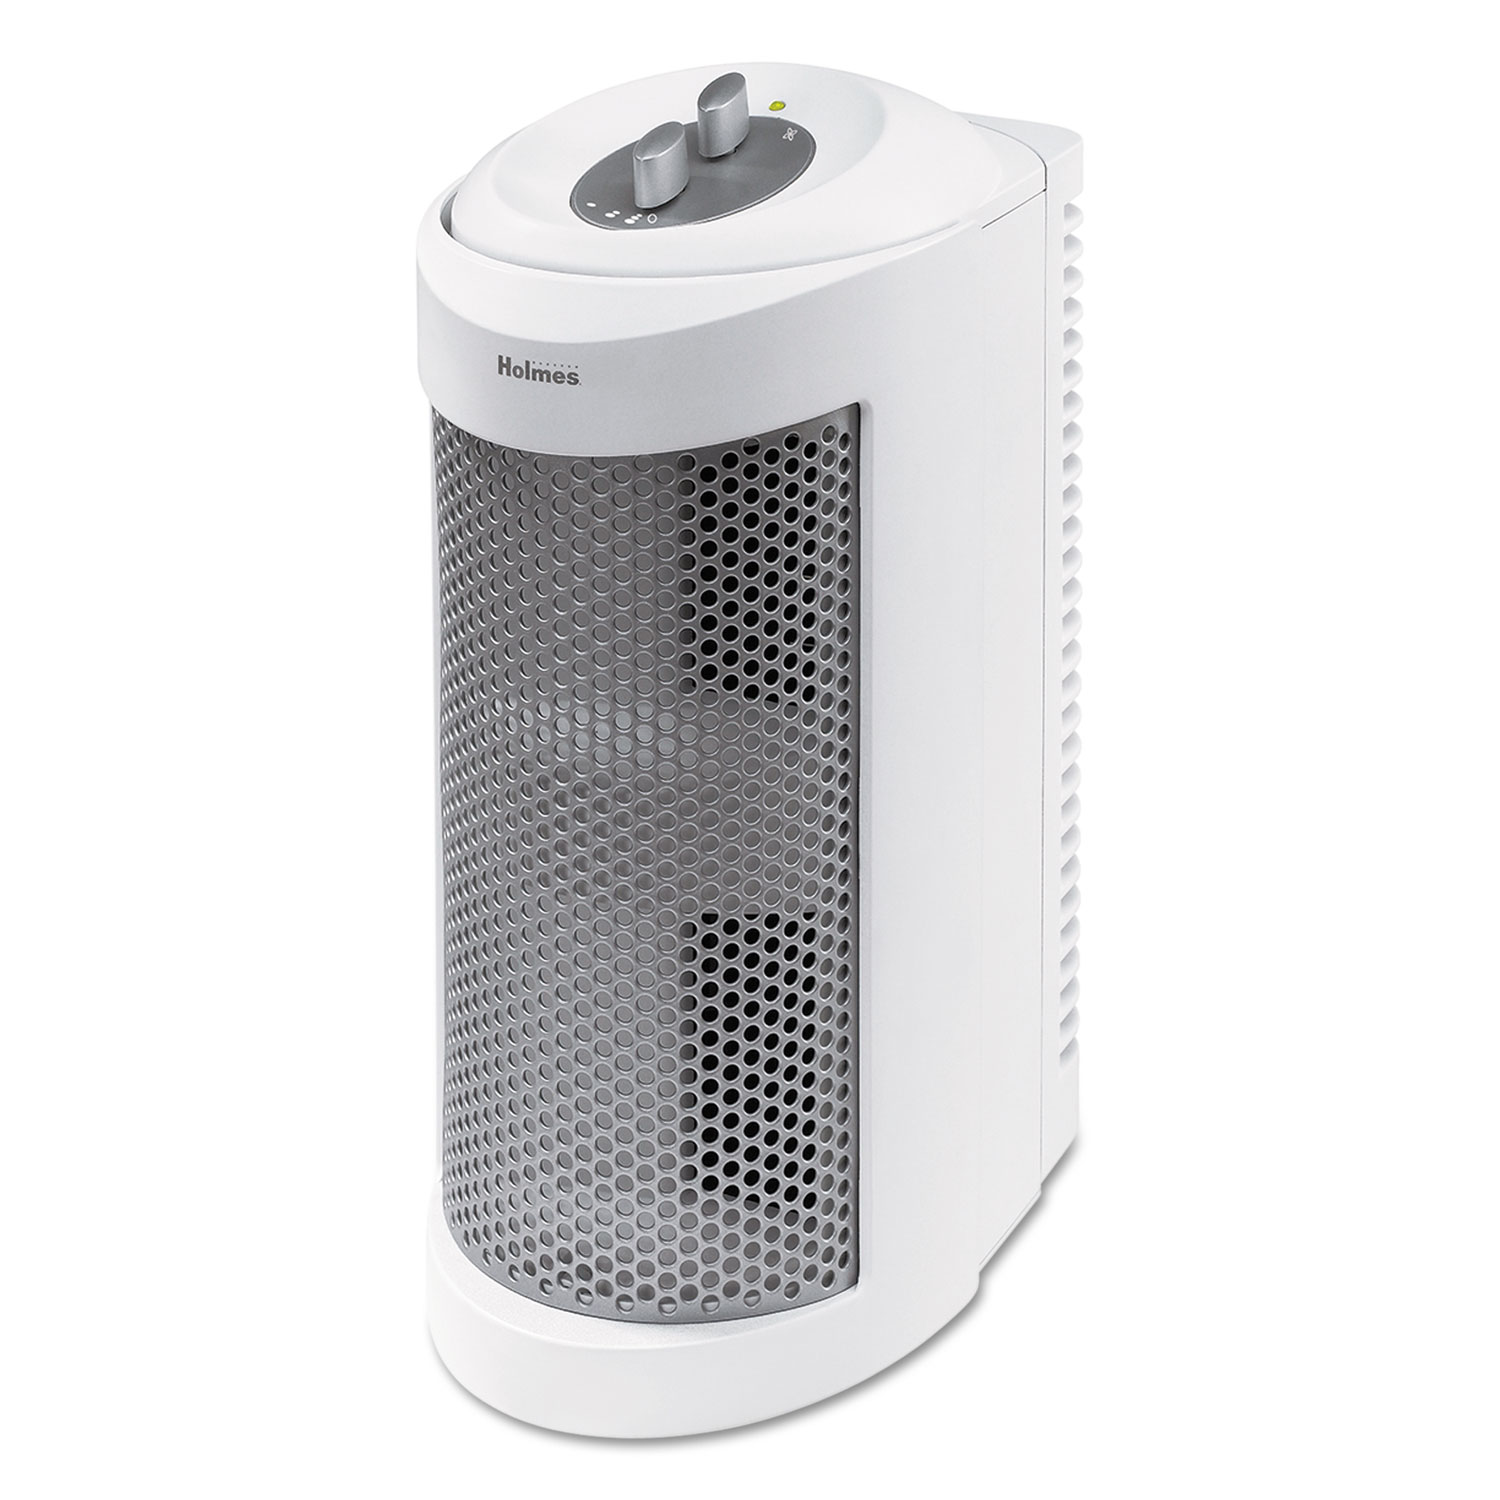 Allergen Remover Air Purifier Mini-Tower, 204 sq ft Room Capacity, White